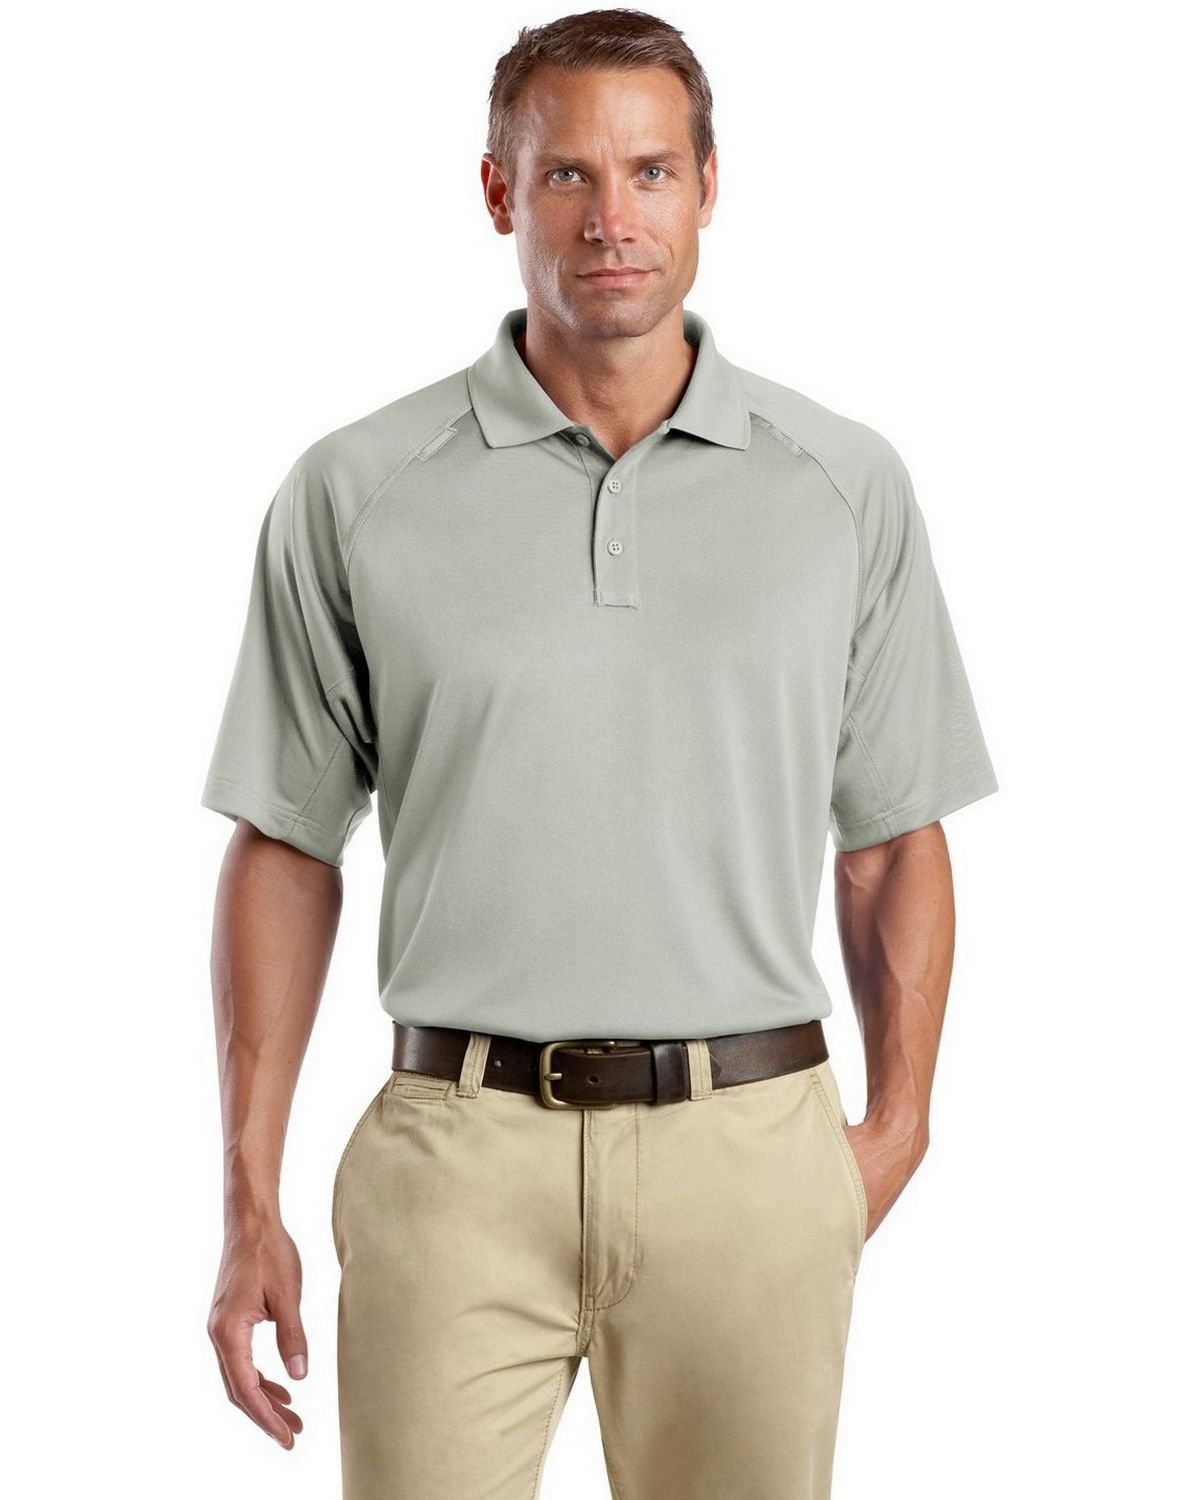 TLCS410 CornerStone Tall Select Snag-Proof Tactical Polo 